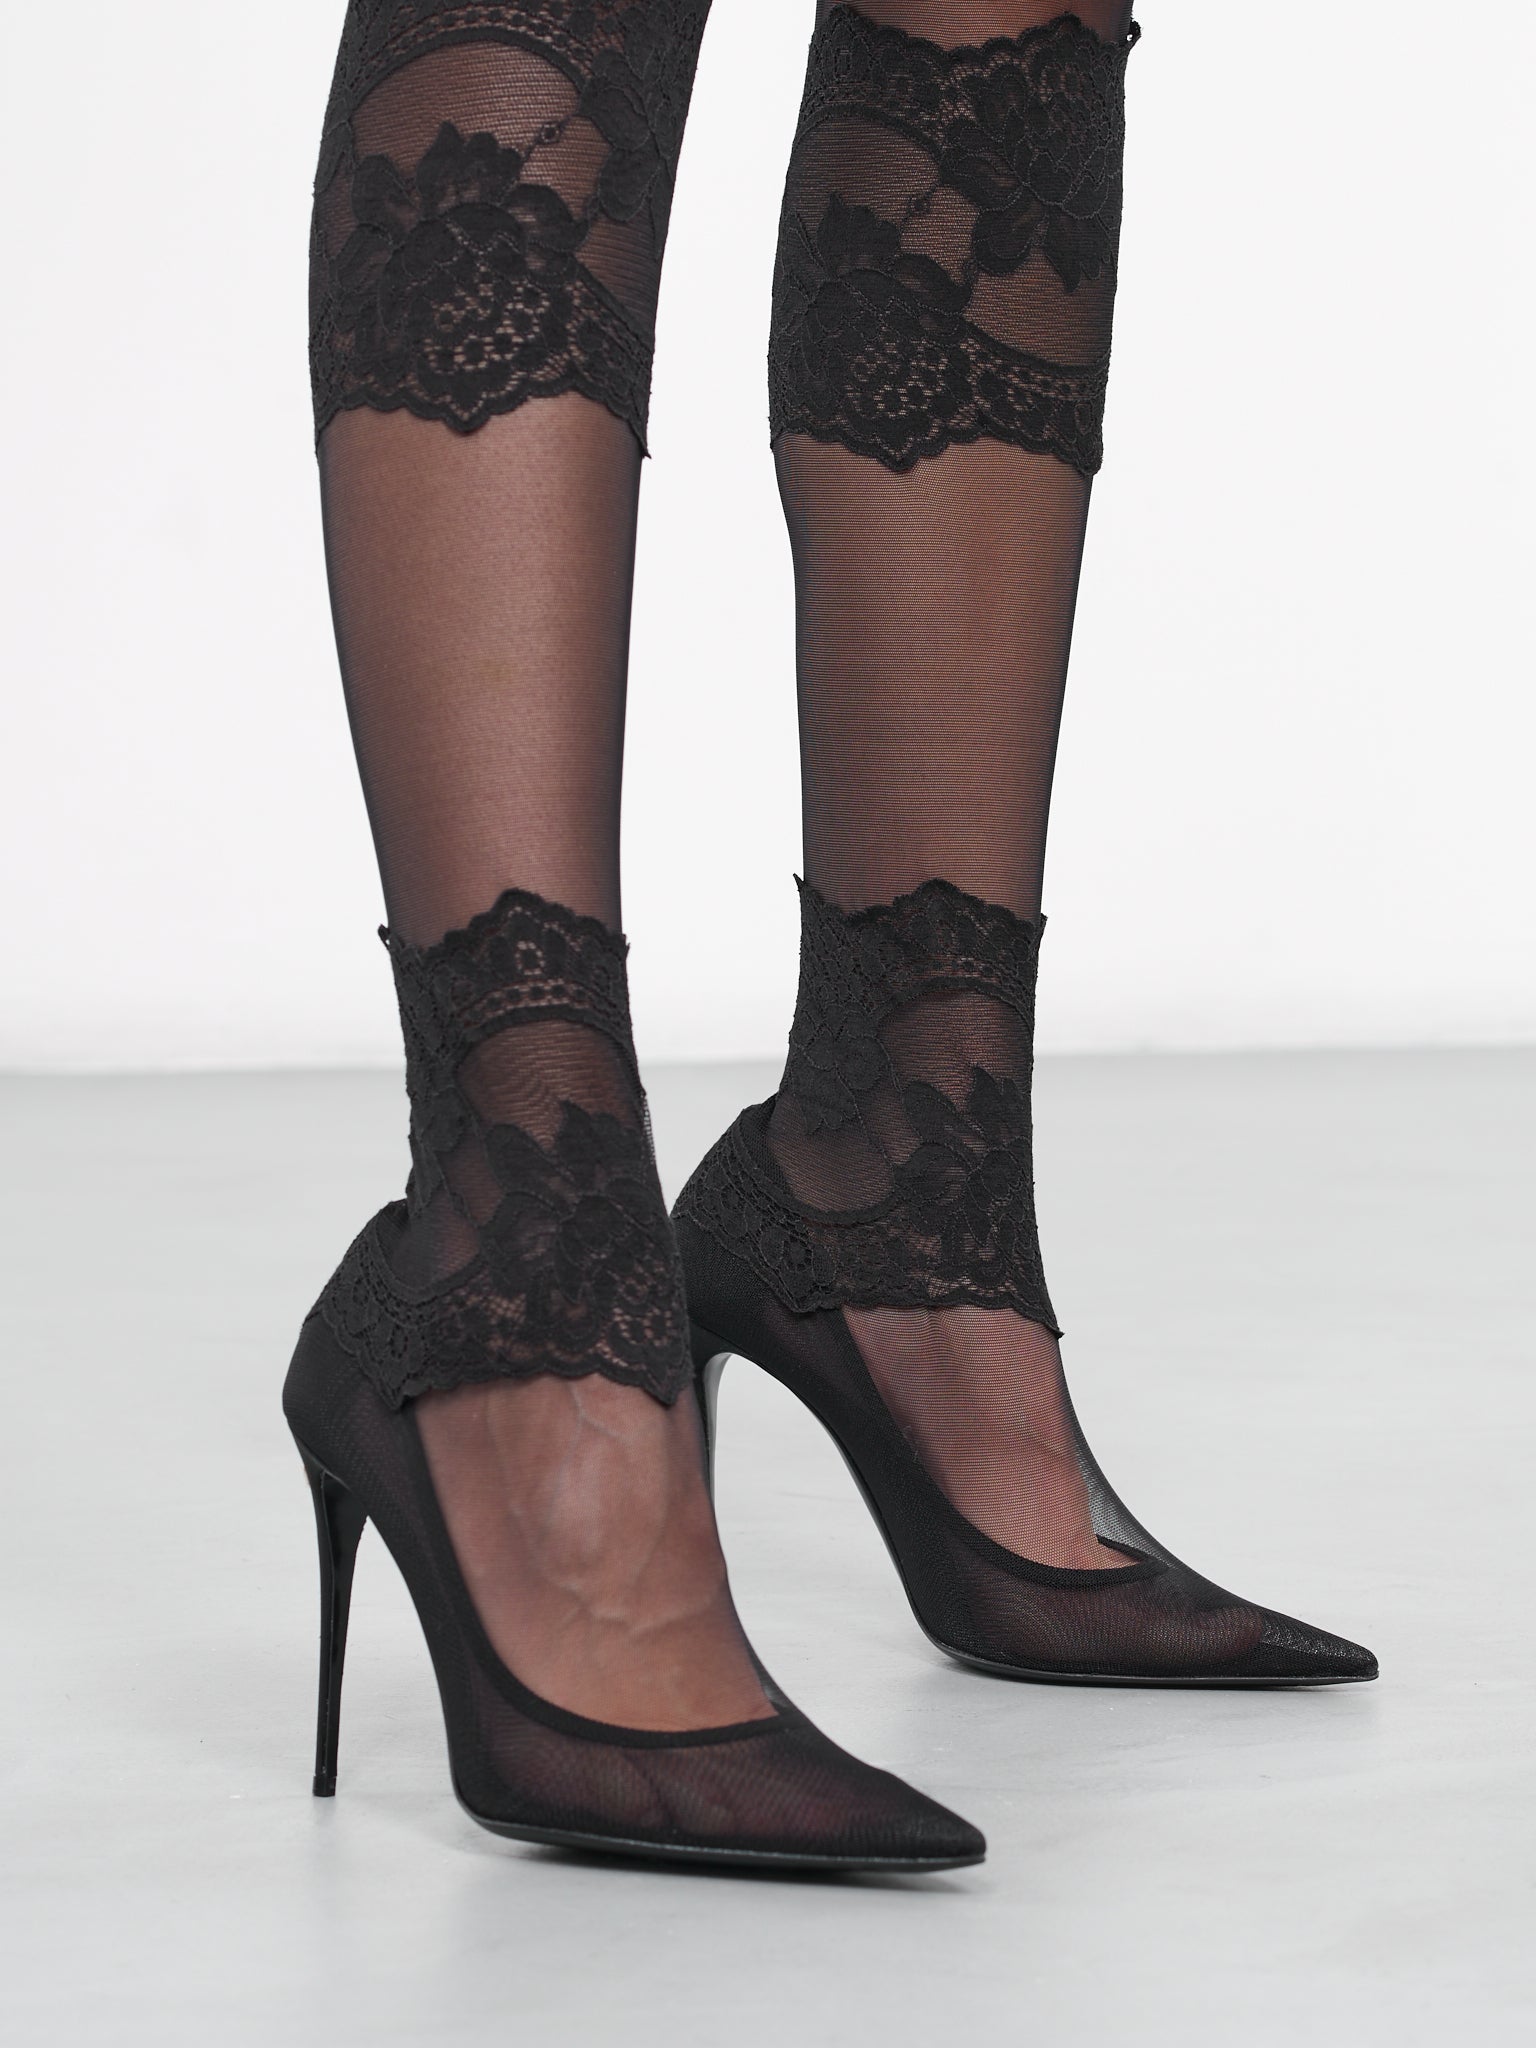 Lace Stocking Boots (CU1033-AN465-8B956-BLACK)